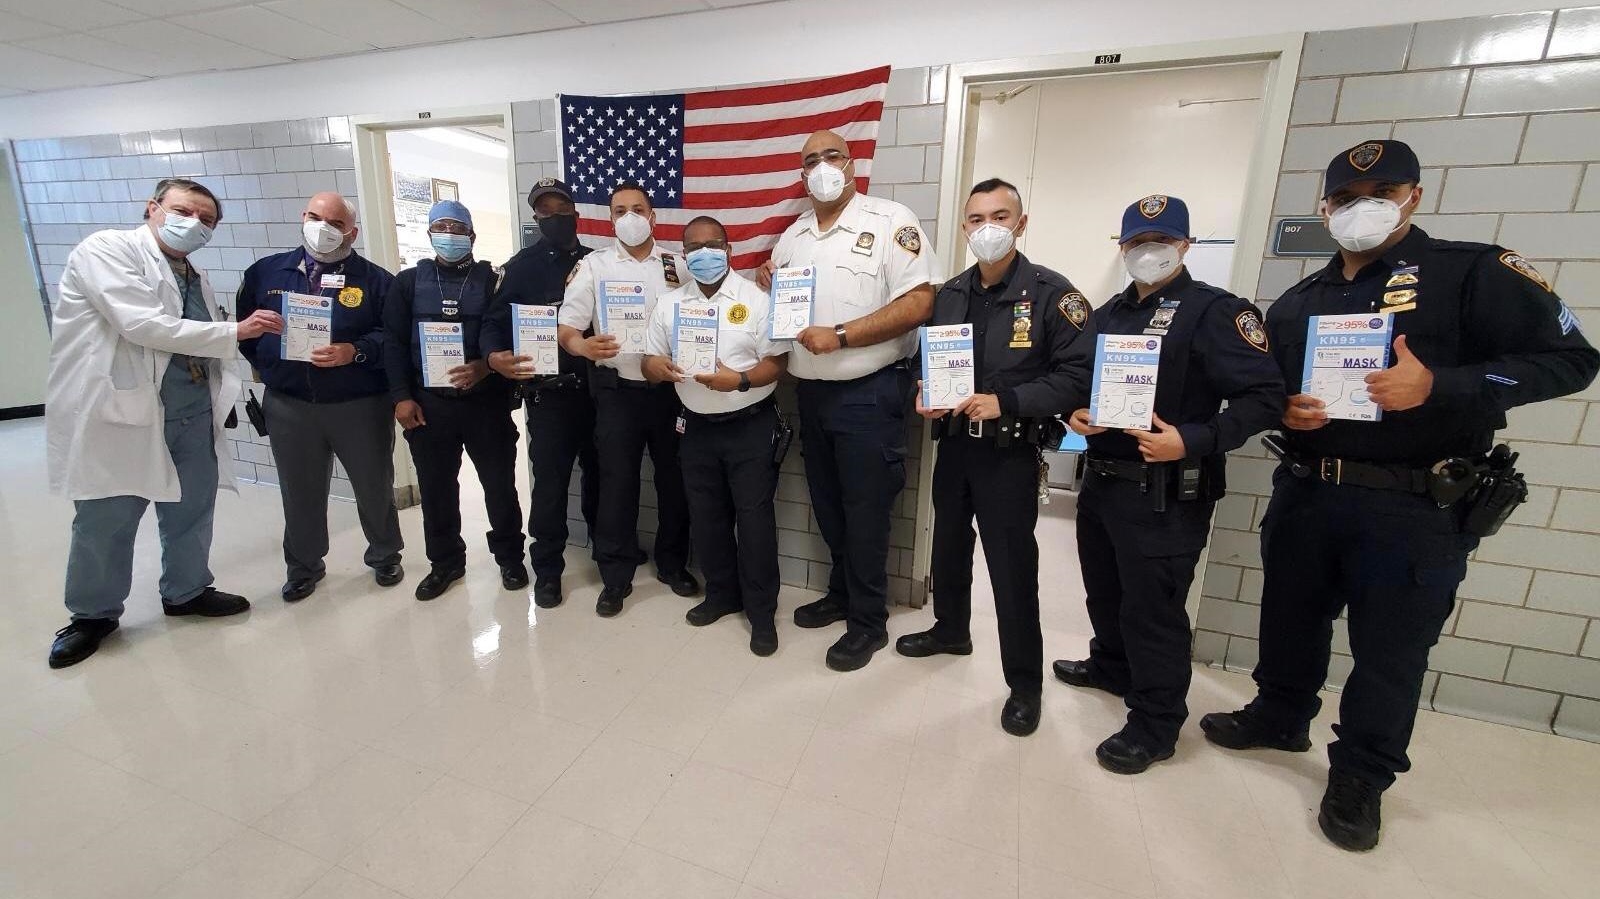 SmarAID distributes PPE to American police officers. Photo: courtesy